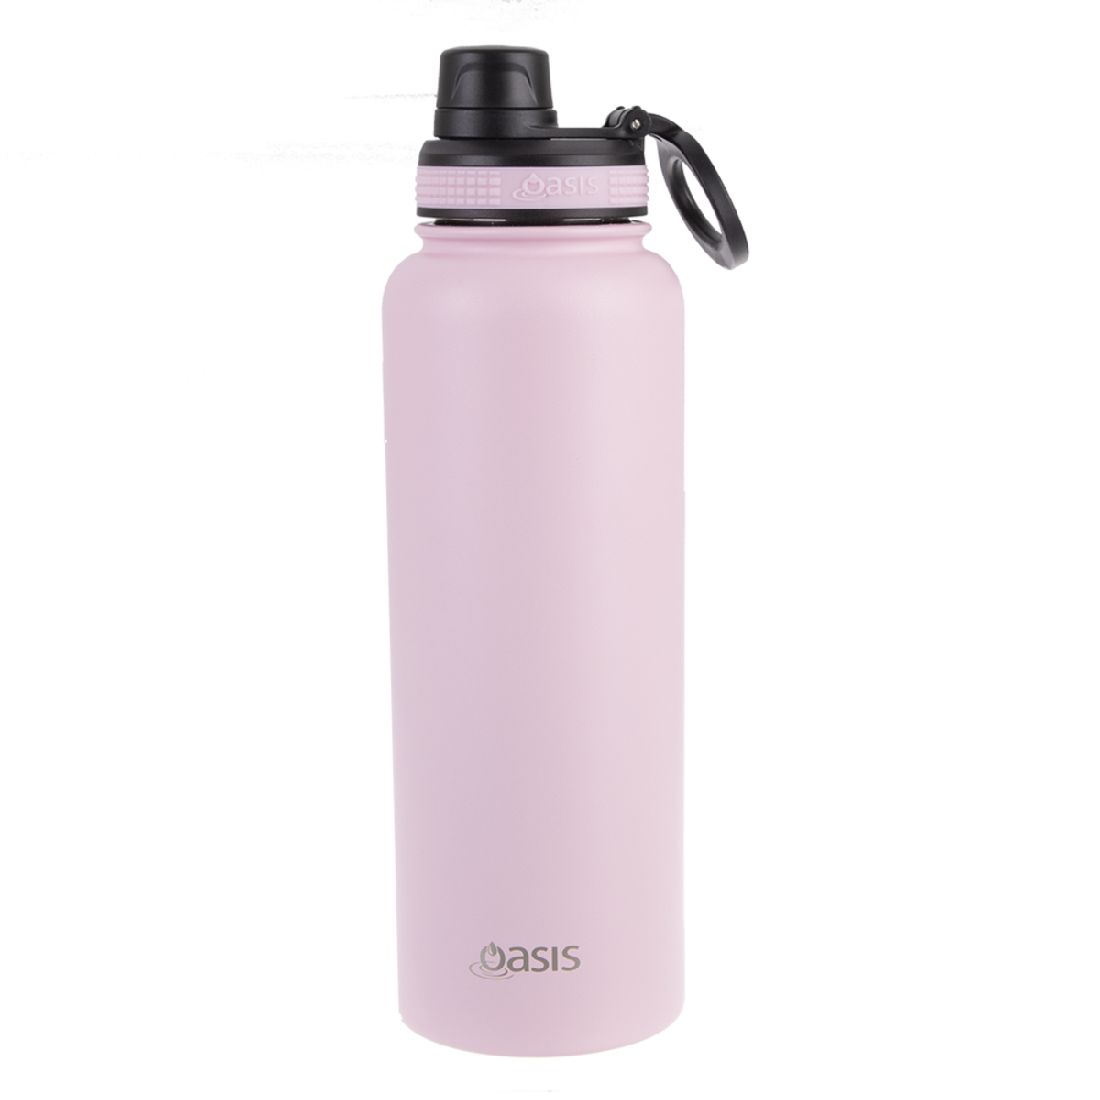 Oasis S/s Double Wall Insulated "challenger" Sports Bottle W/ Screw Cap 1.1l - Carnation